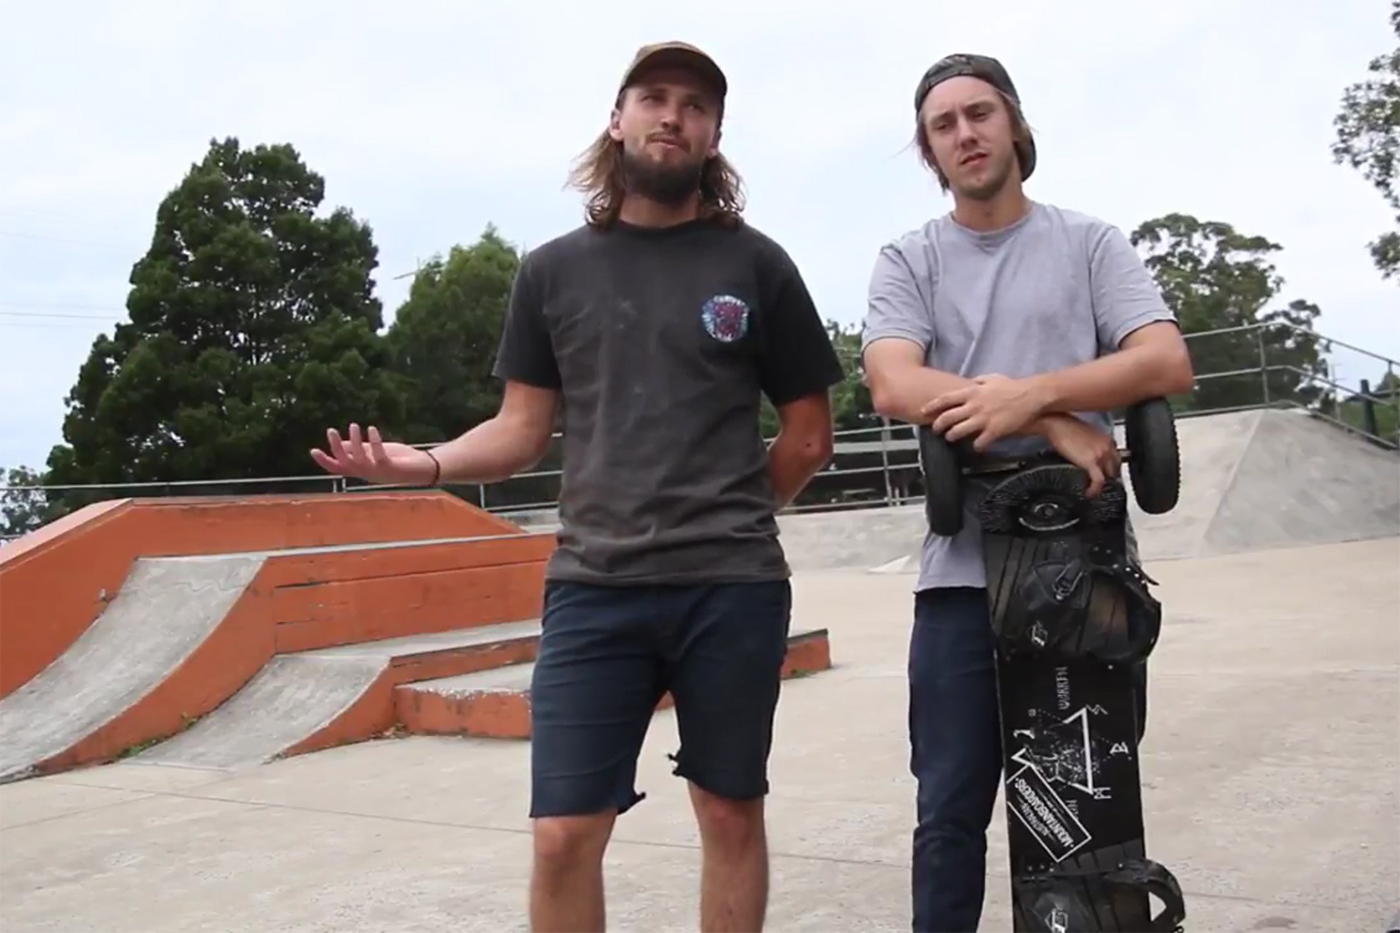 HOW TO MOUNTAINBOARD AT THE SKATEPARK